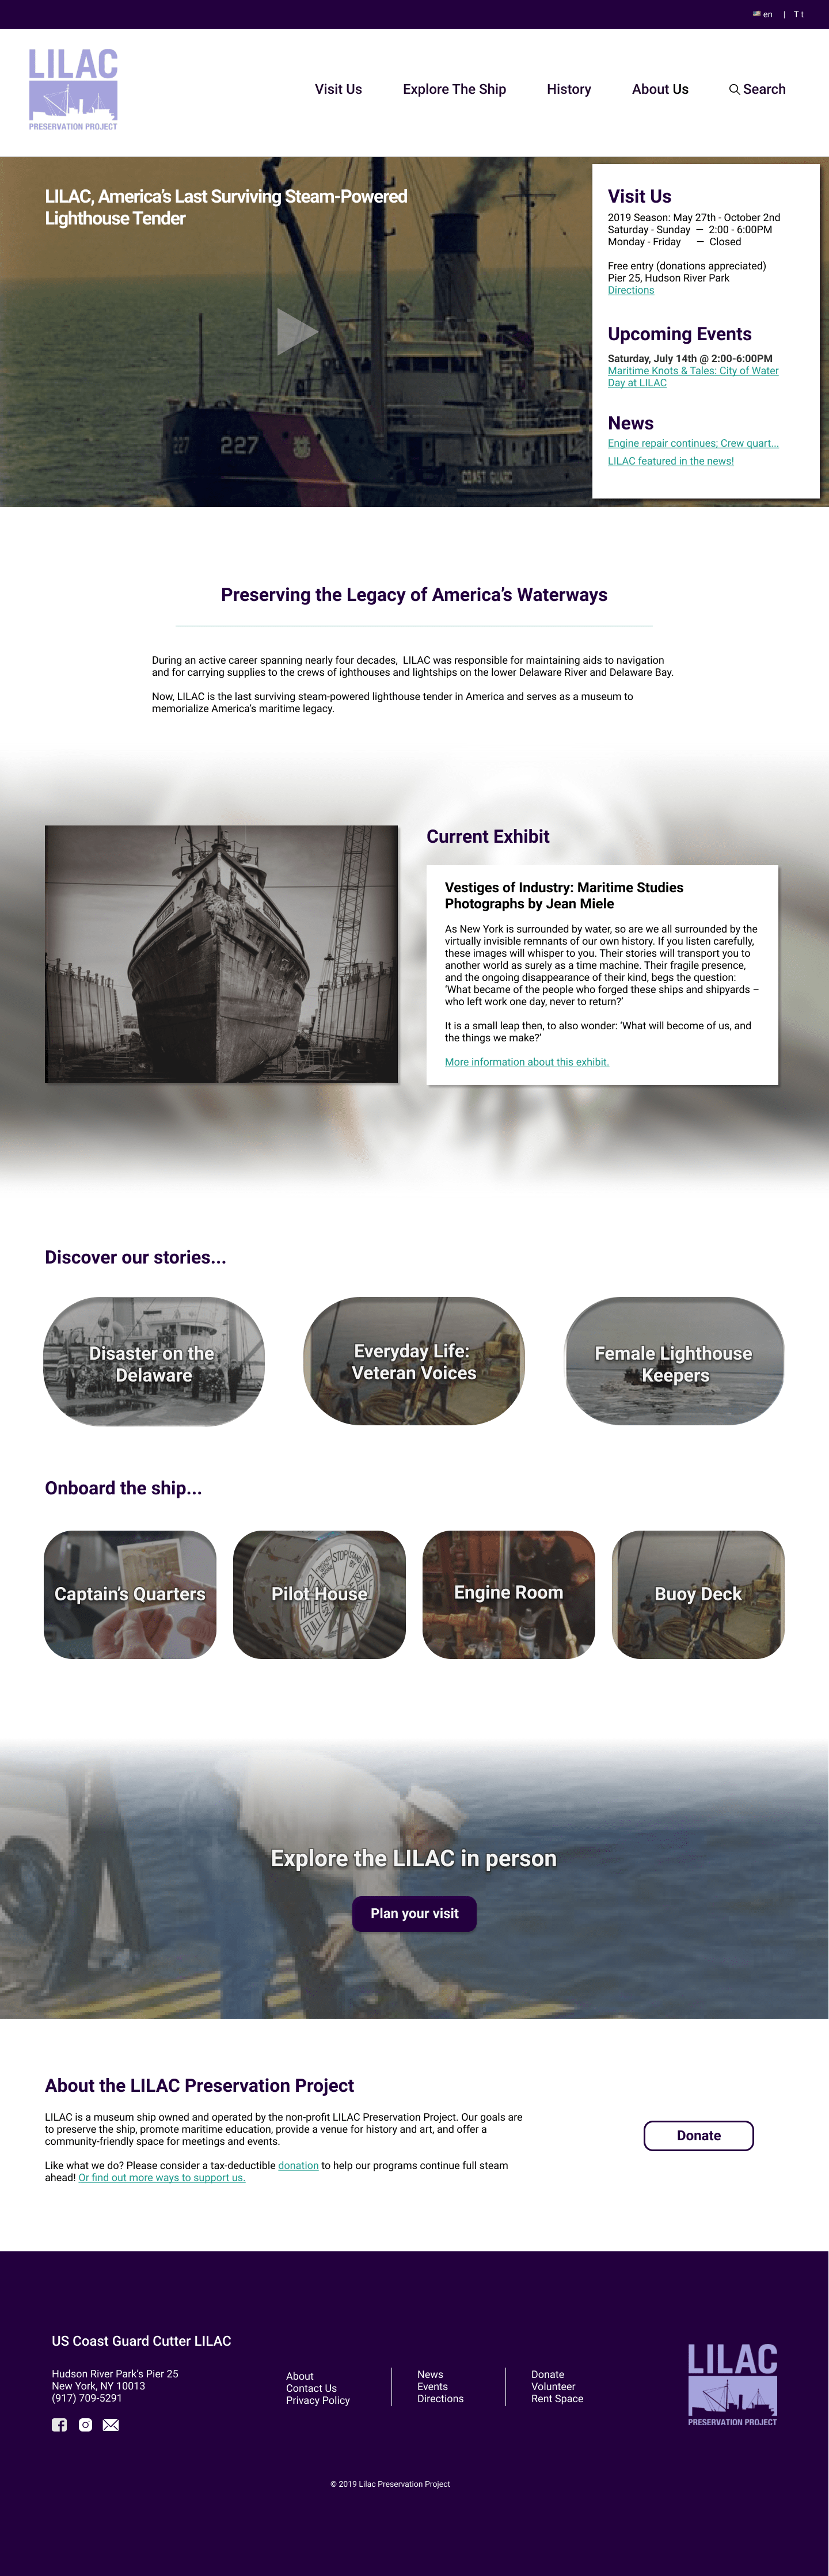 Homepage of the LILAC site as hi-fi wireframes, version 2